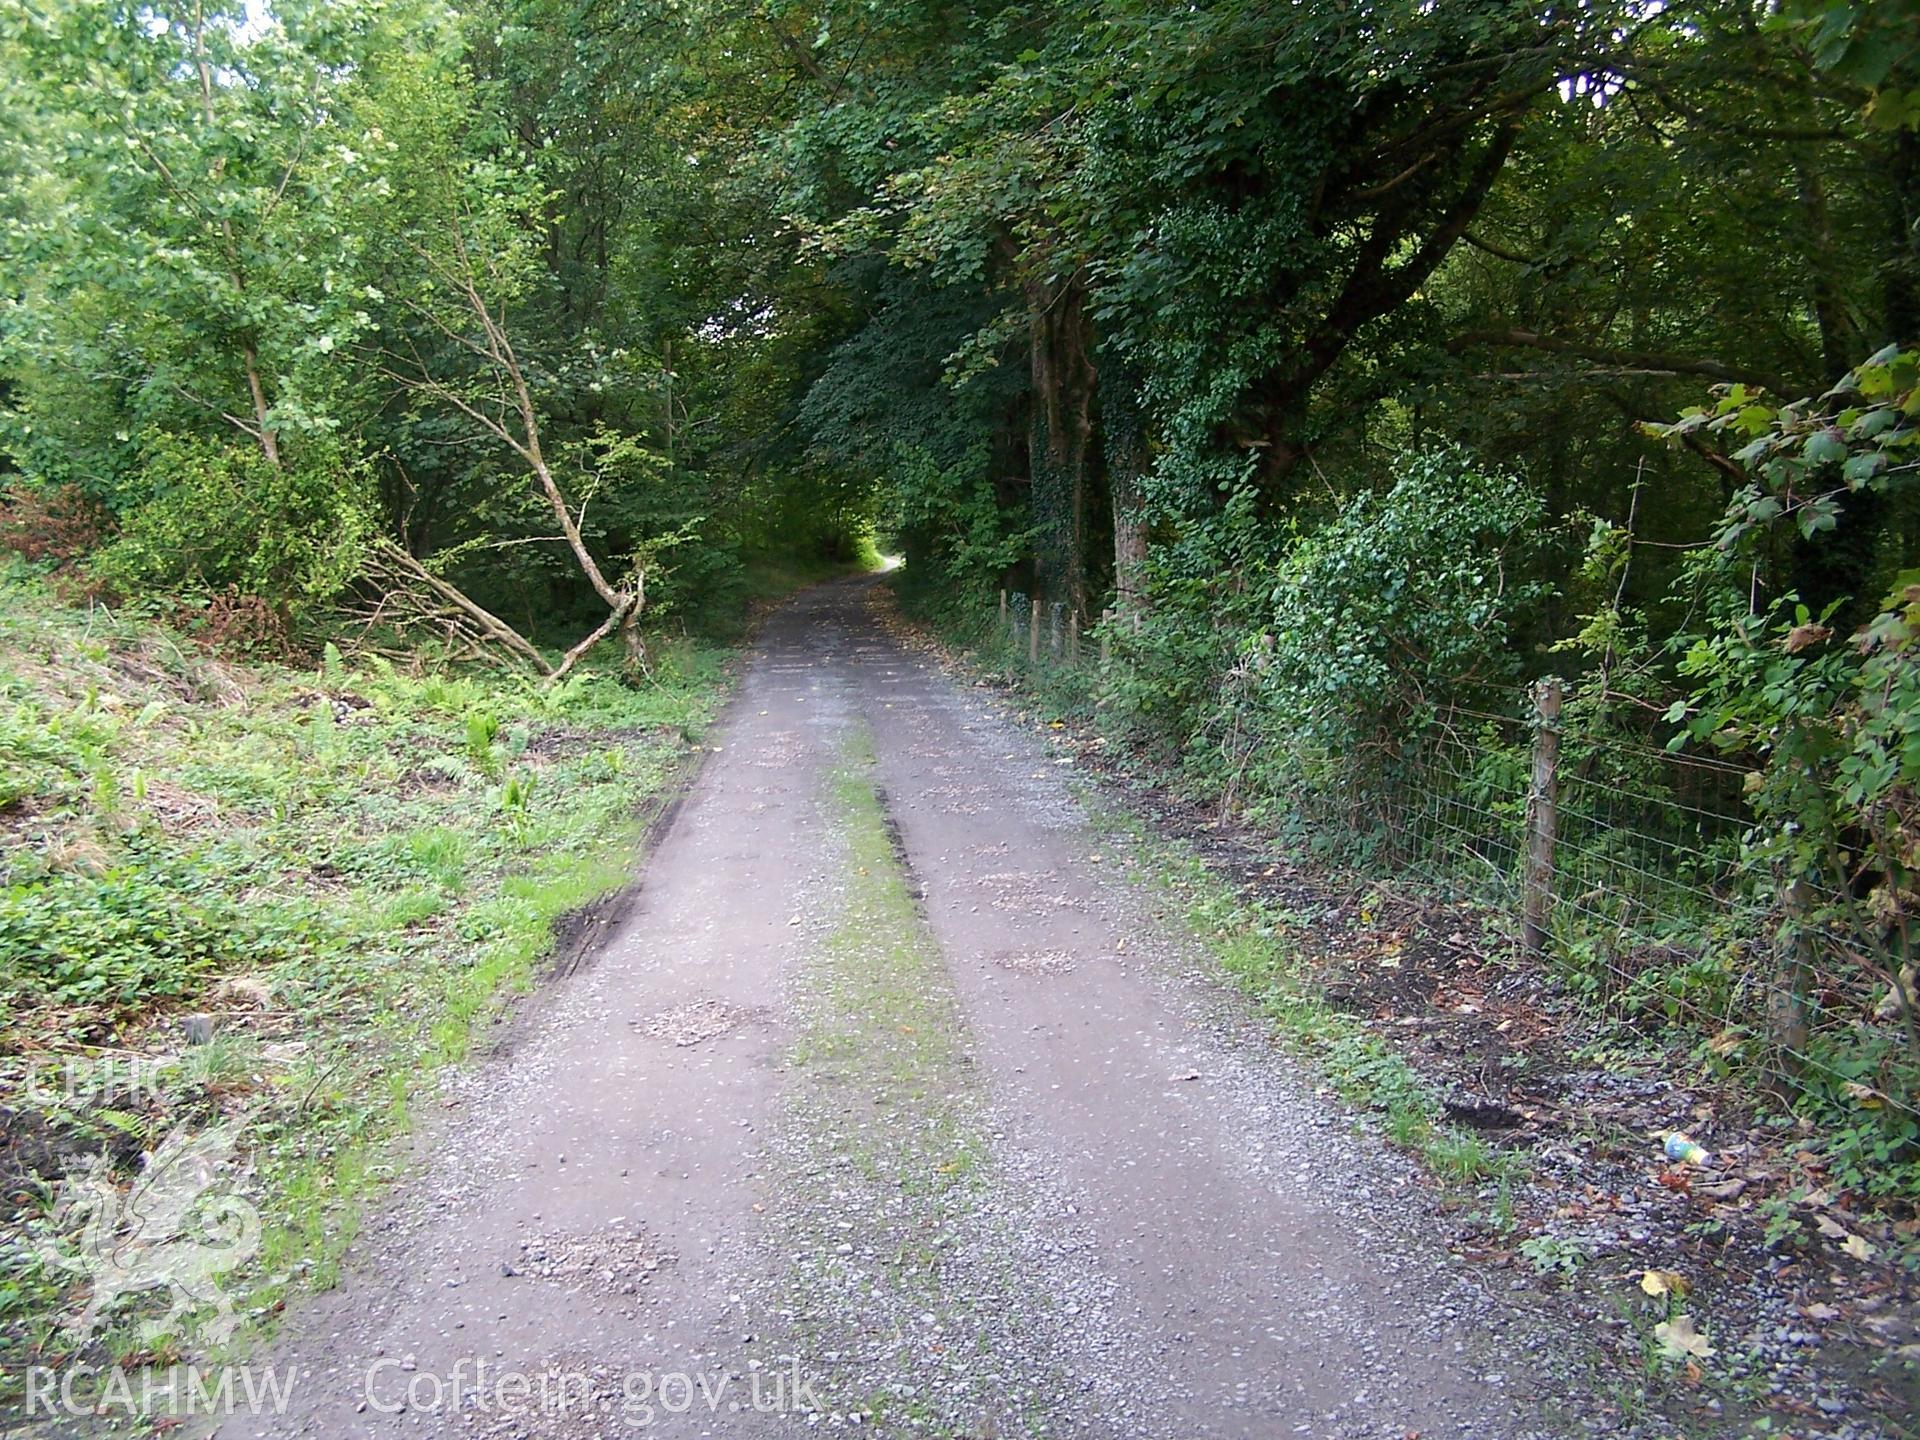 View looking north-east along the entrance road, close to the site of the former entrance gates (NPRN:405057).